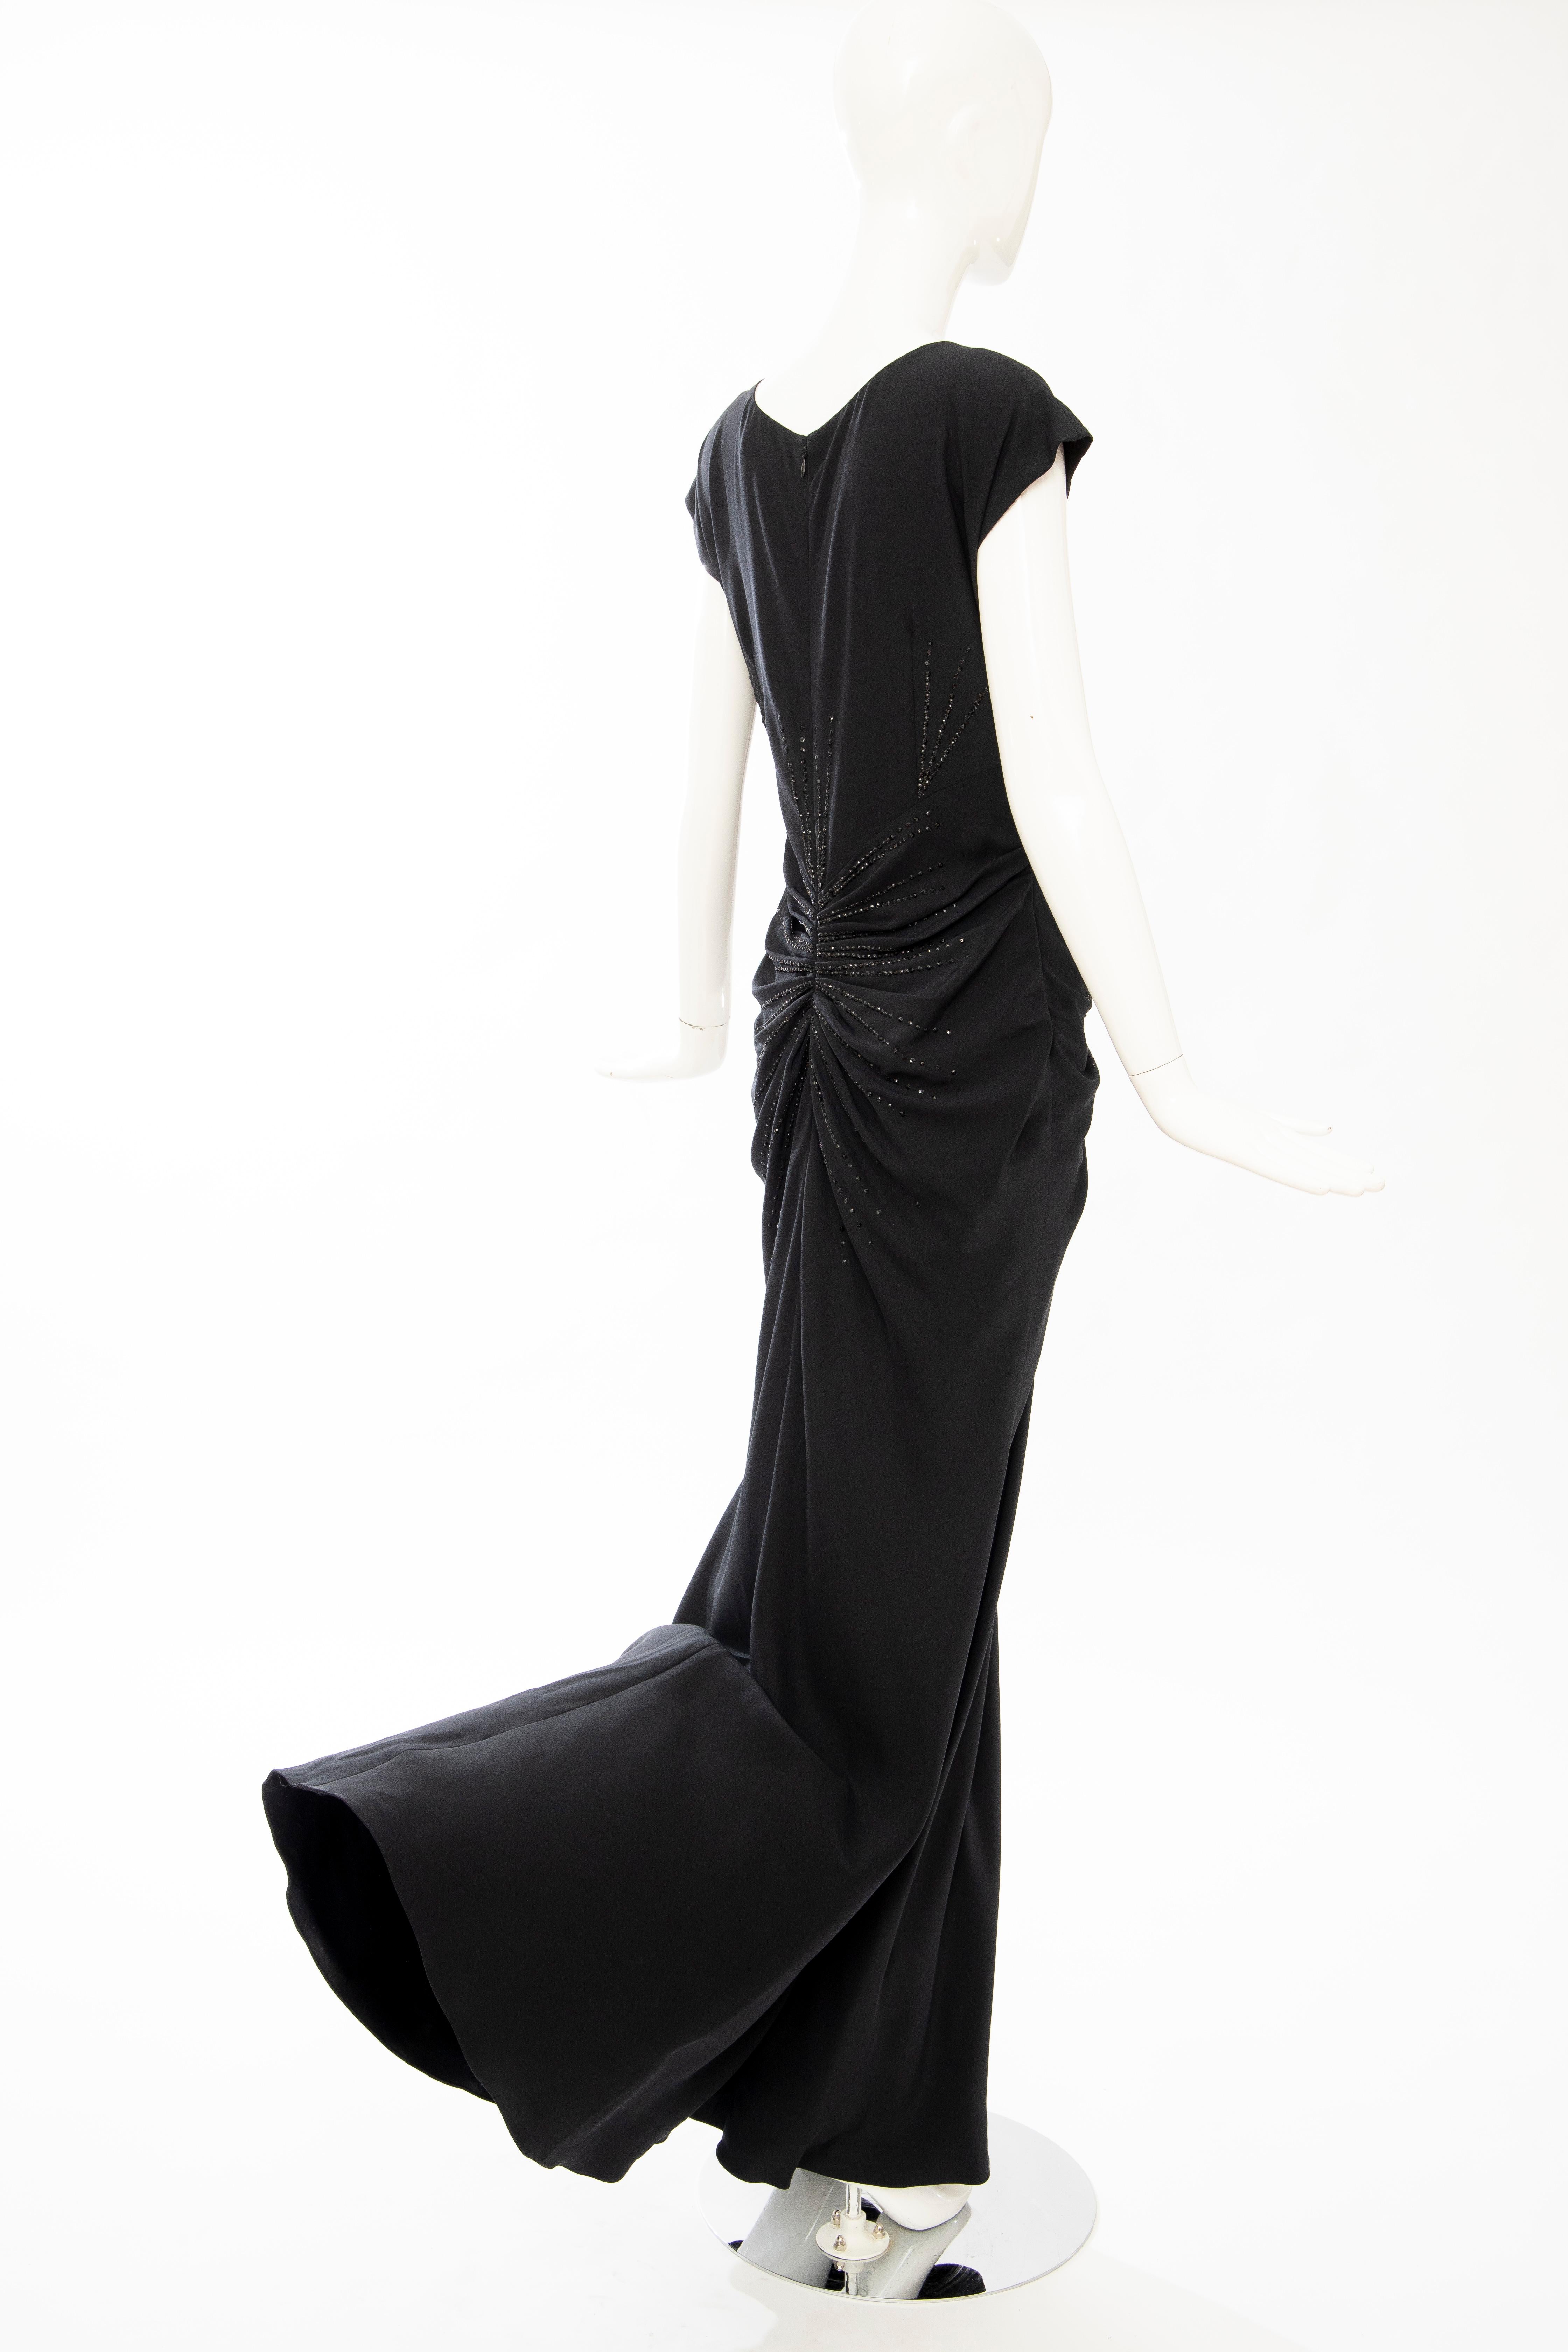 John Galliano for Christian Dior Black Embroidered Evening Dress, Spring 2008 3